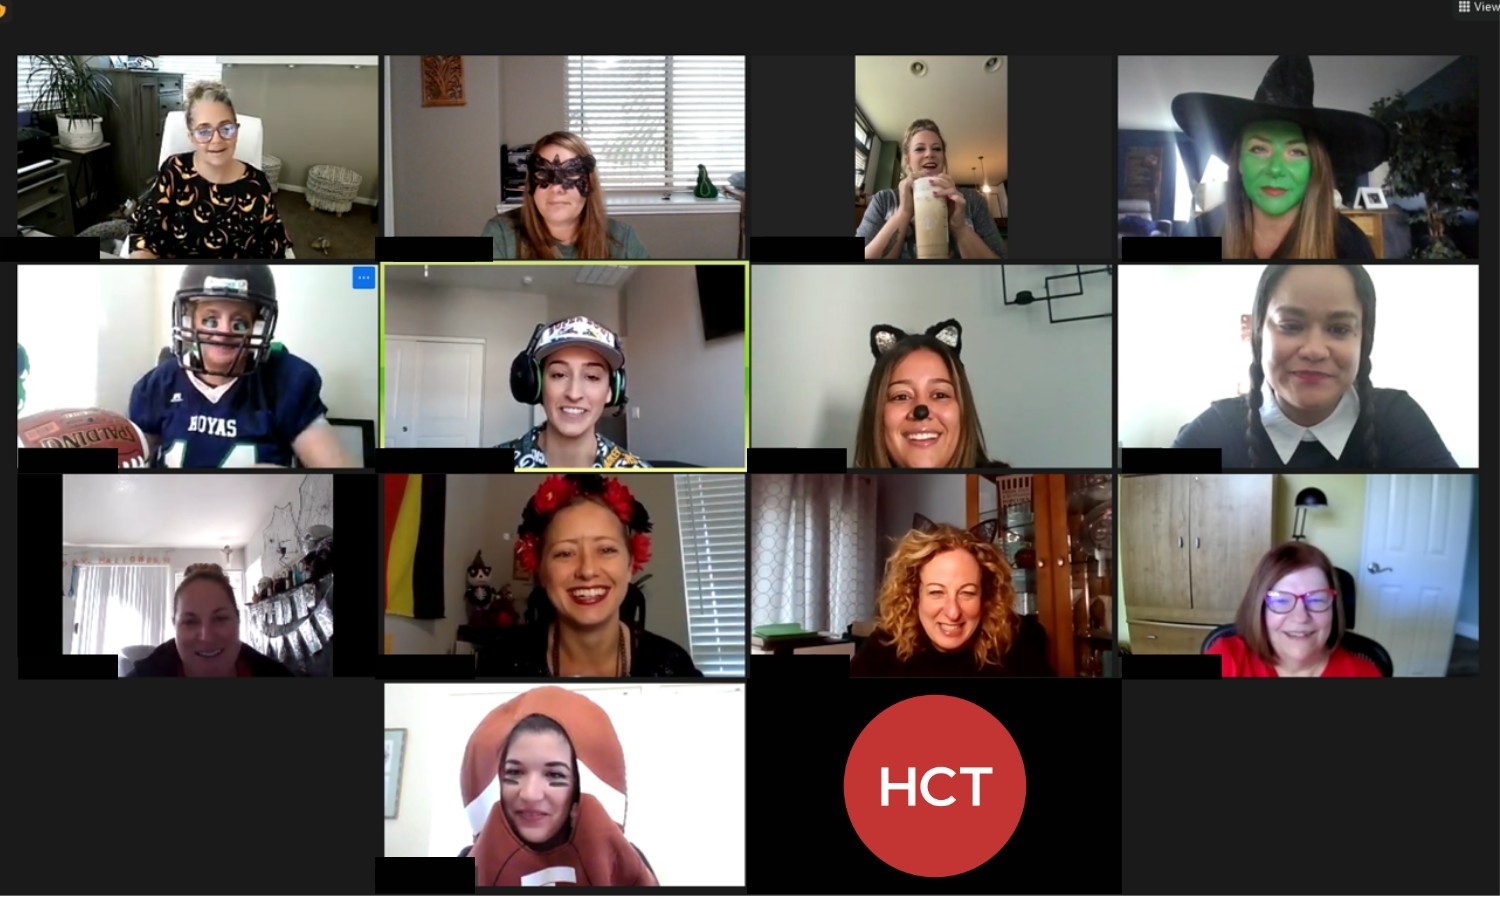 Remote work doesn't mean less fun at HCT!